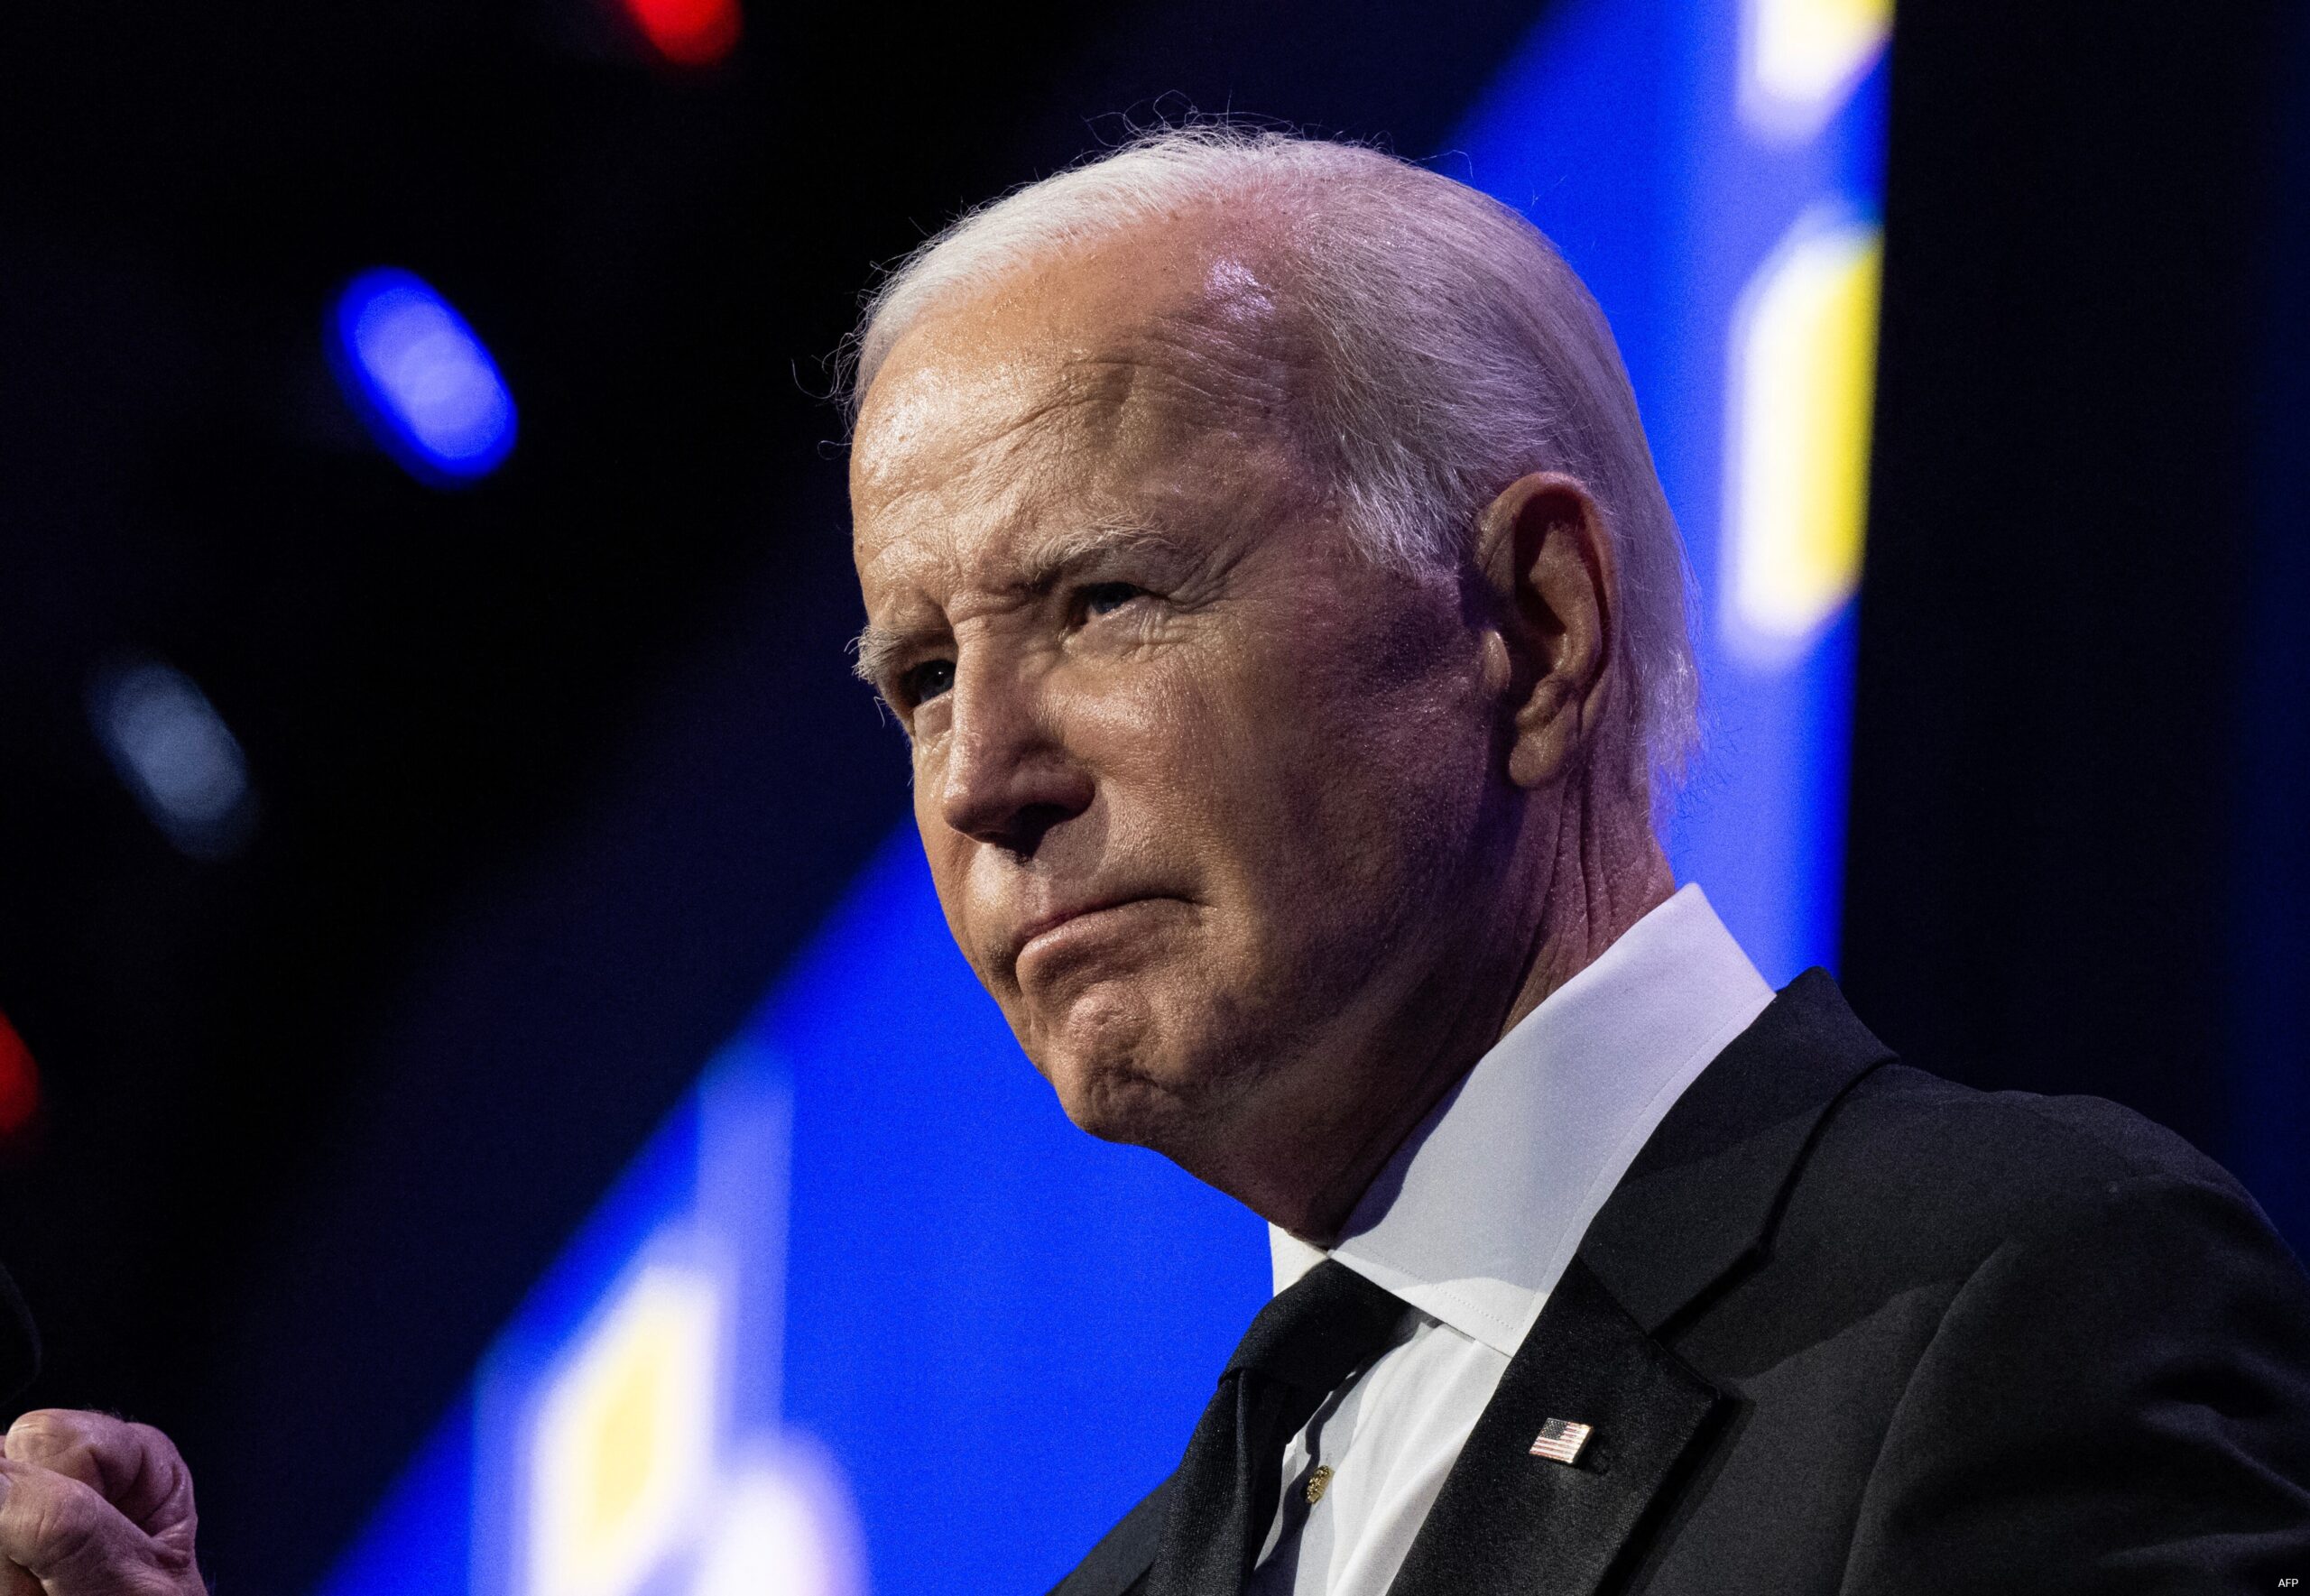 Biden Appoints Indian American To Key Position